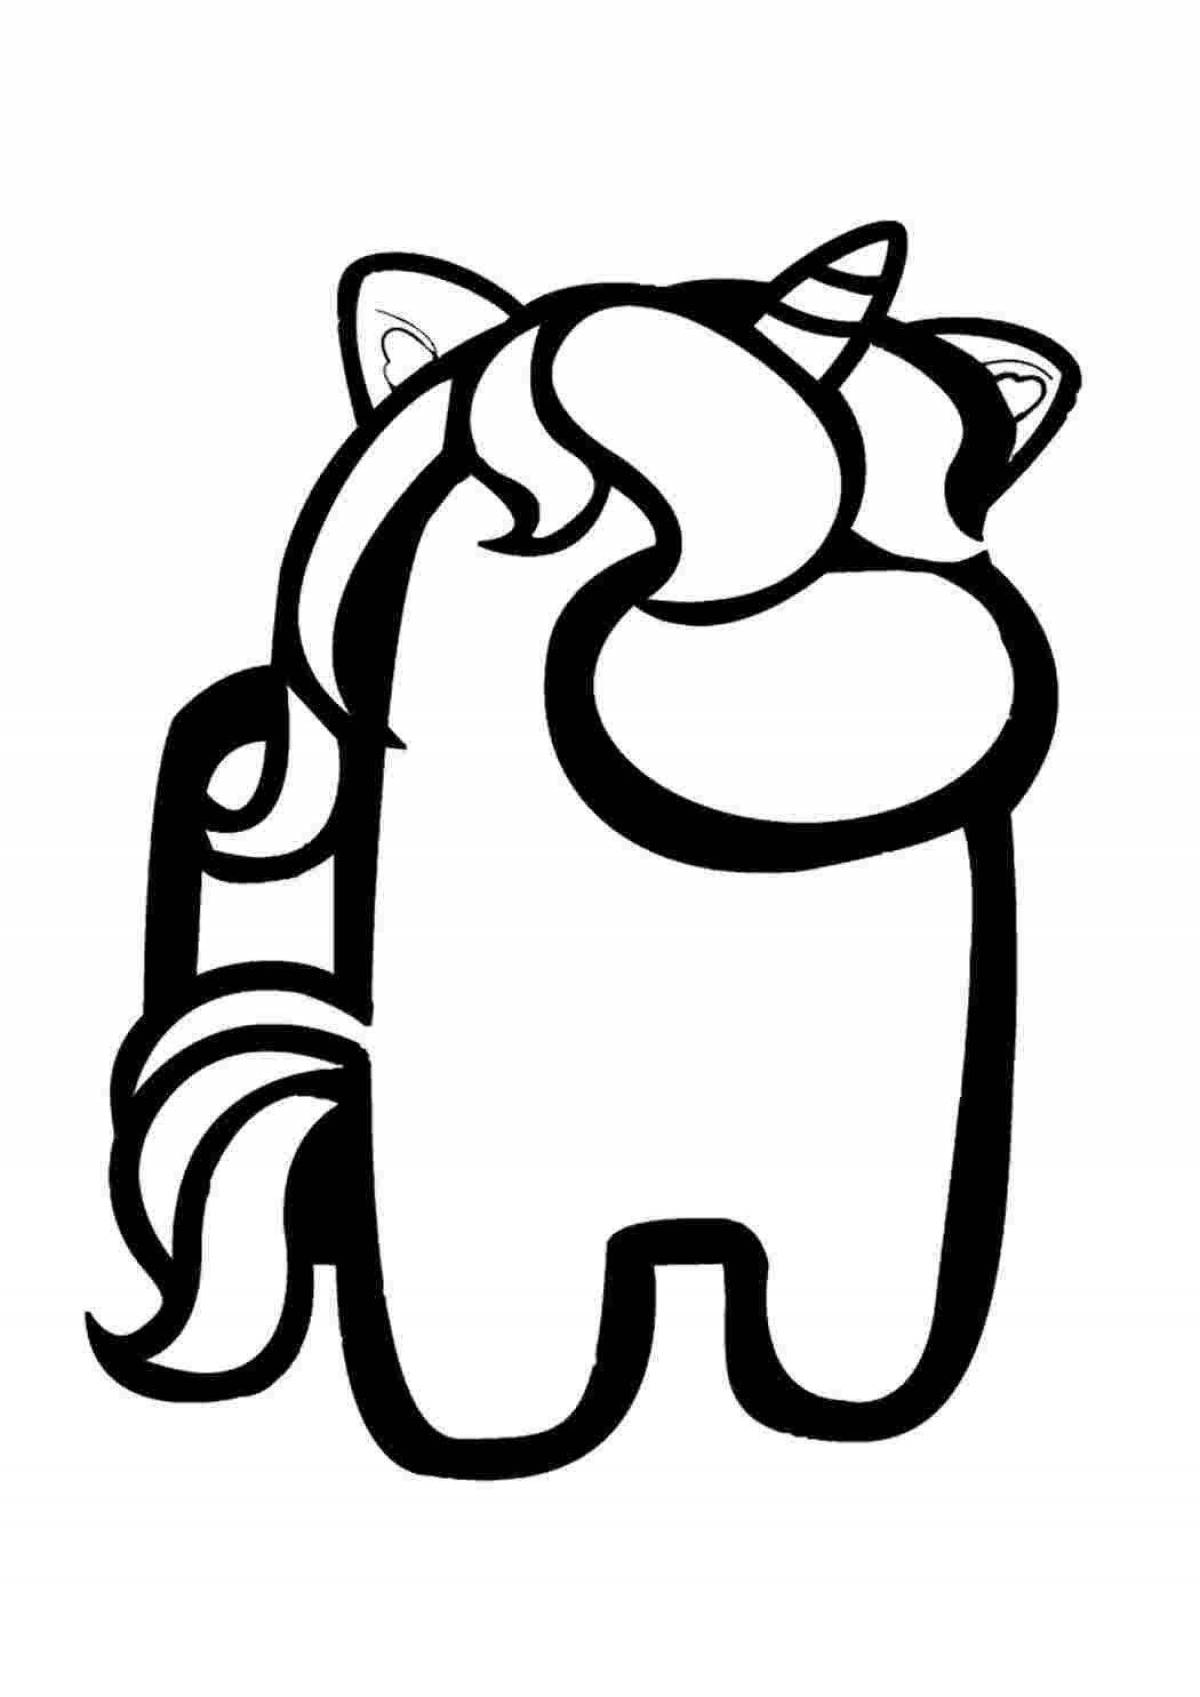 Adorable ace sticker coloring page